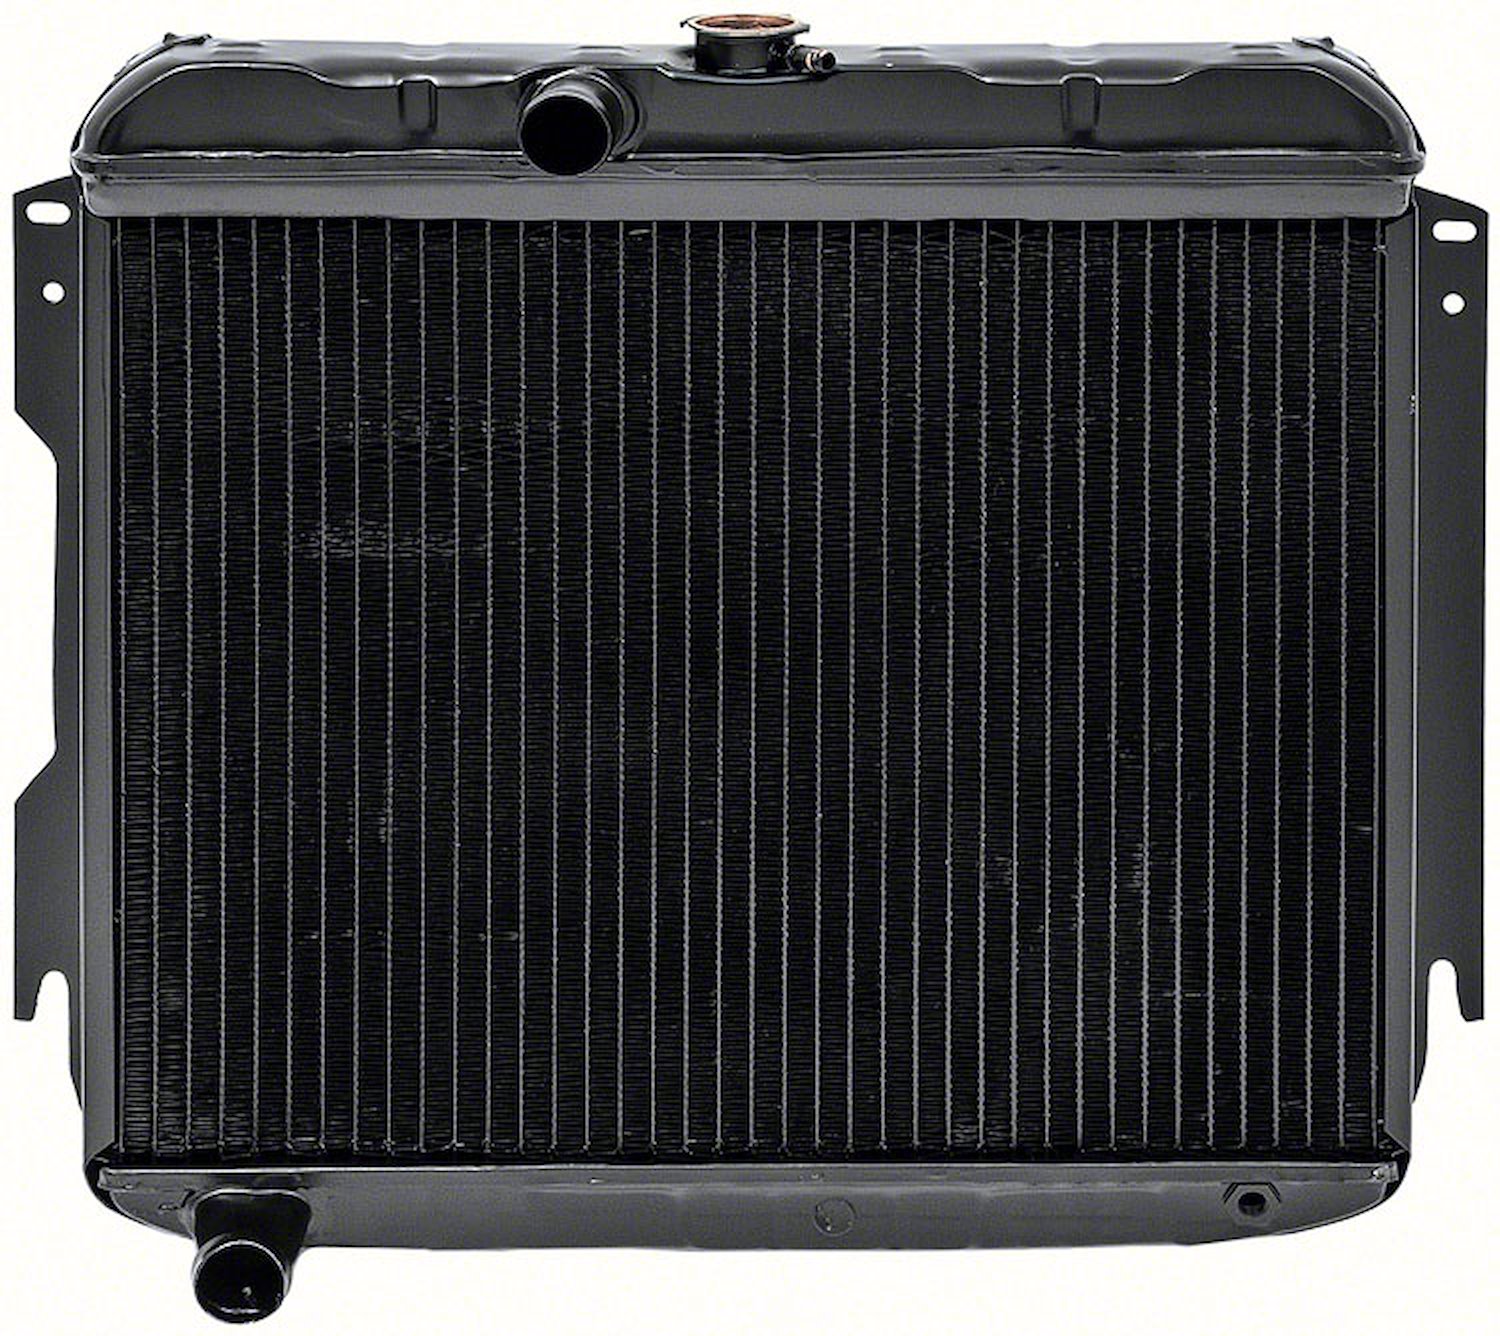 MB2361S Replacement Radiator 1962-64 Plymouth Fury V8 361/383/413/426 With Standard Trans 3 Row